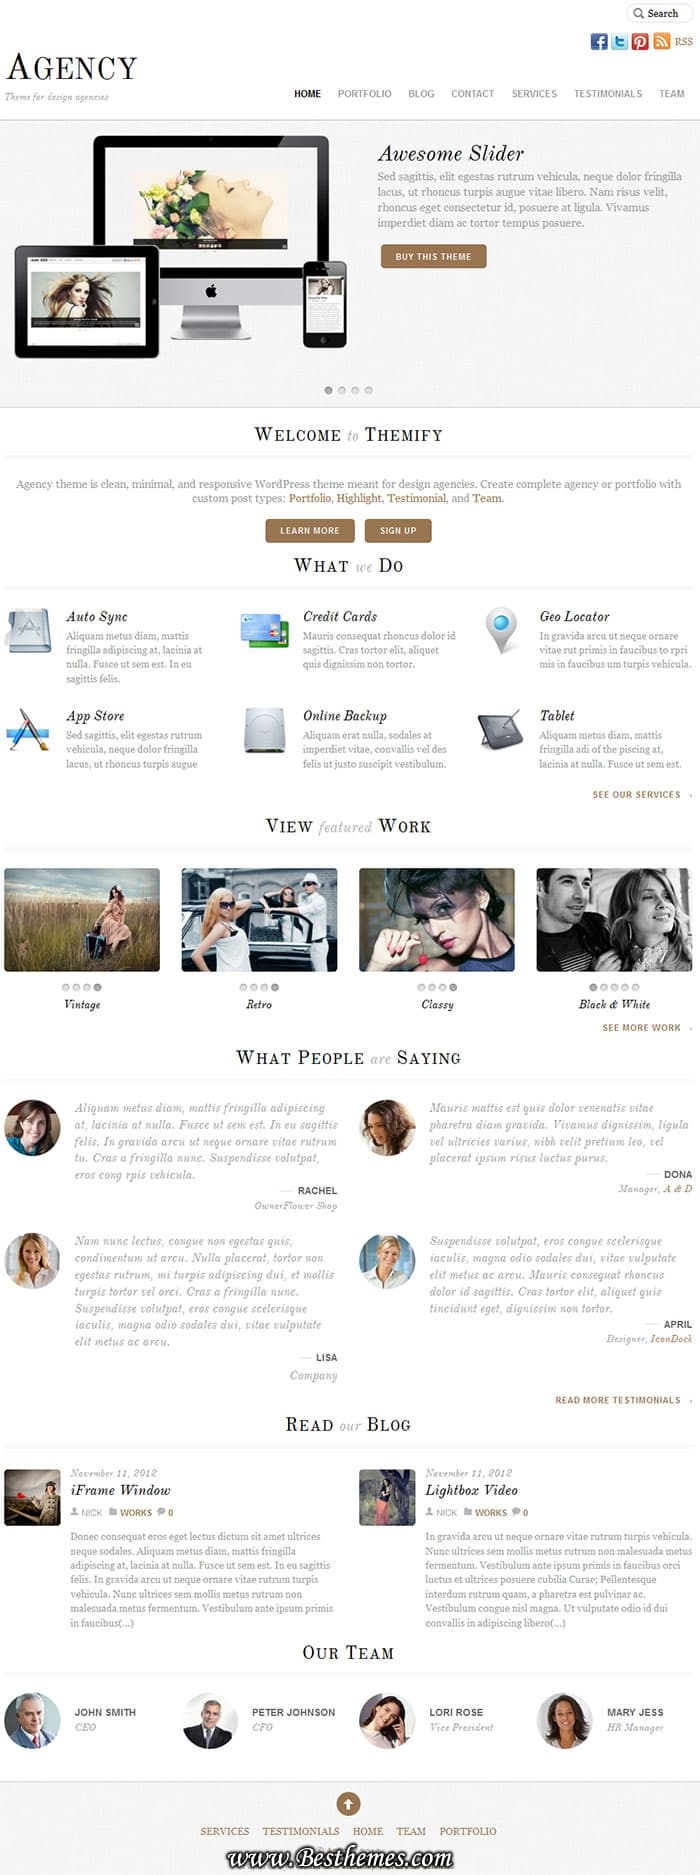 Download Agency WordPress Theme From Themify. Portfolio section with multiple columns, 7 color styles, Google map in contact form